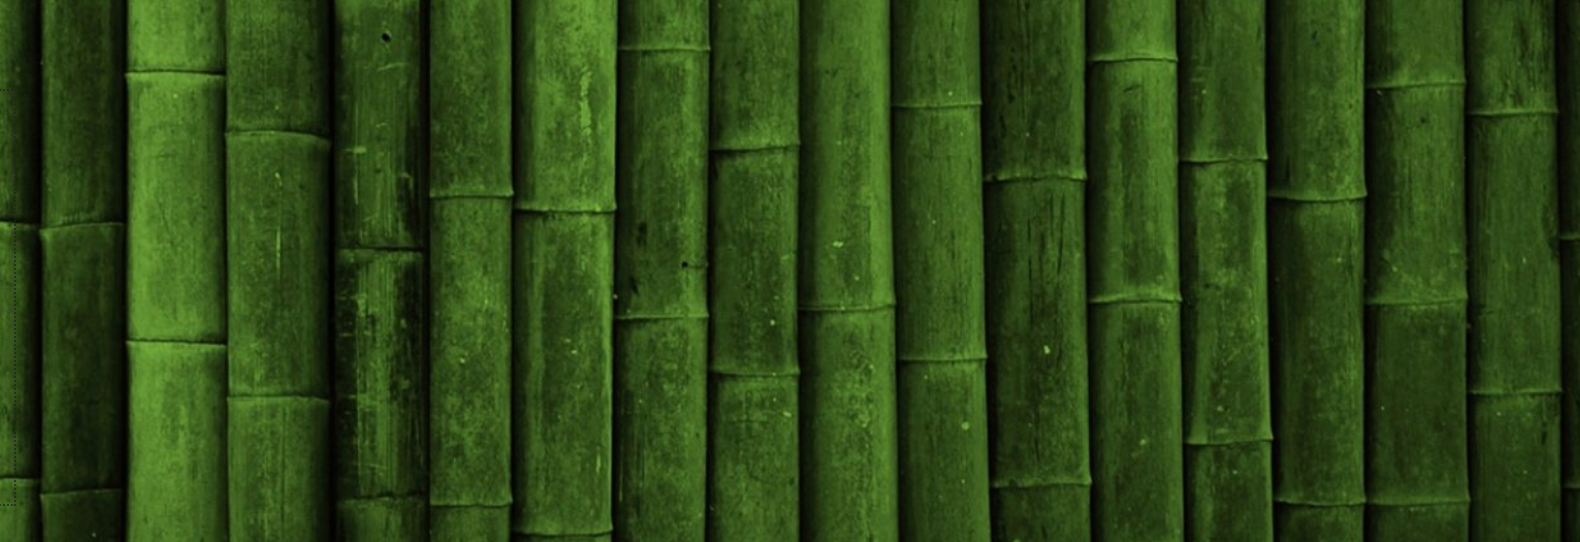 Bamboo Species Guide